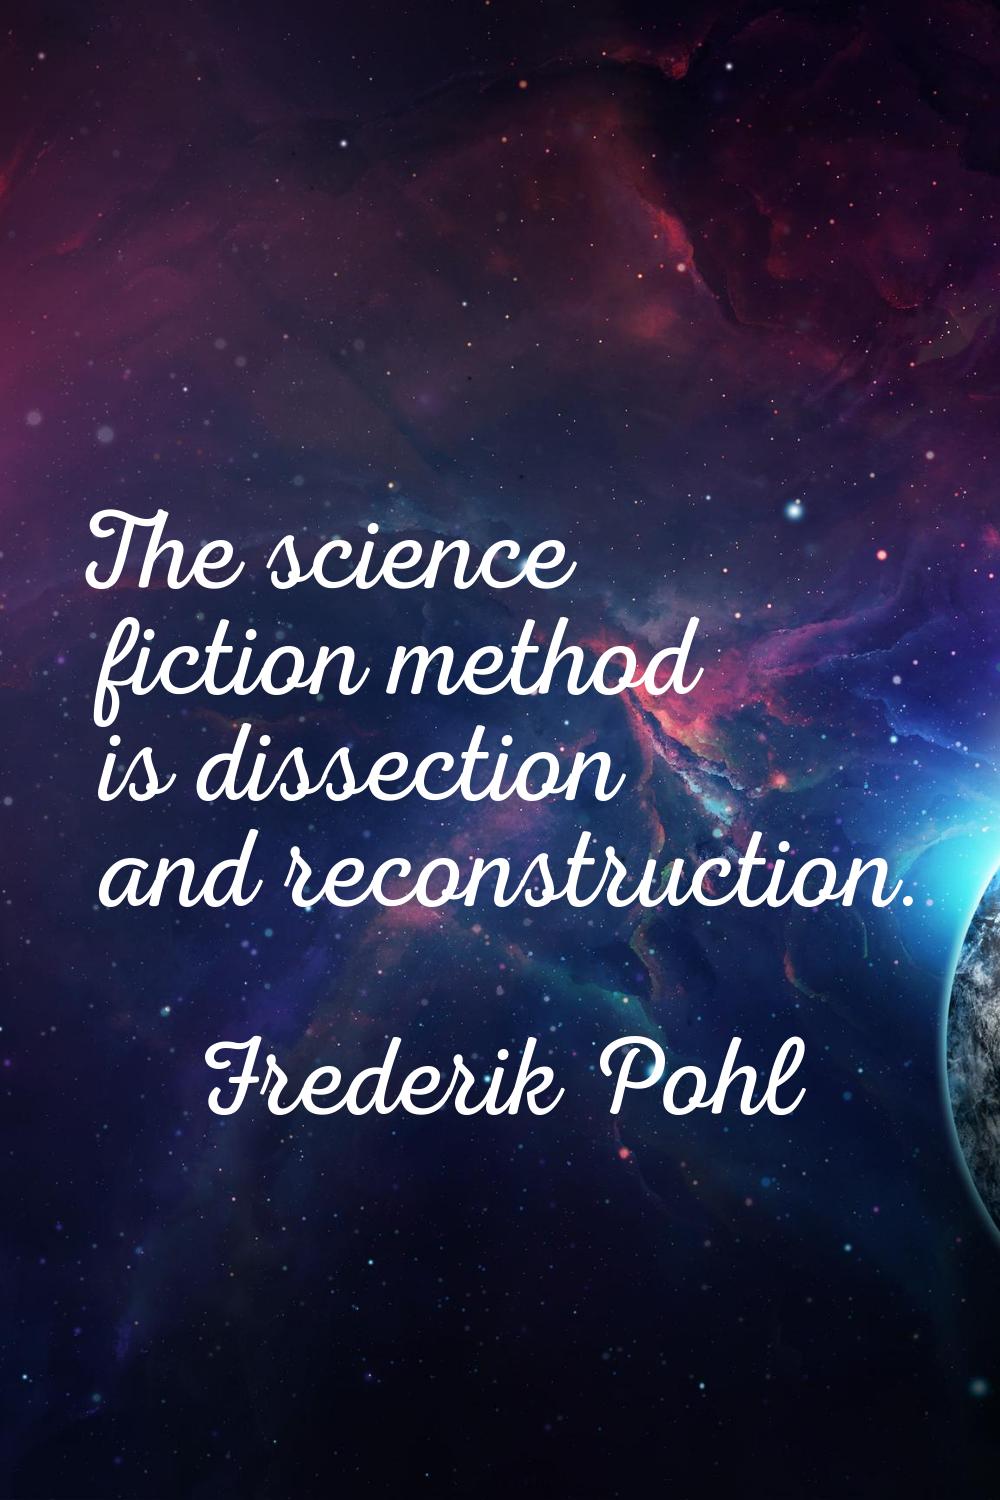 The science fiction method is dissection and reconstruction.